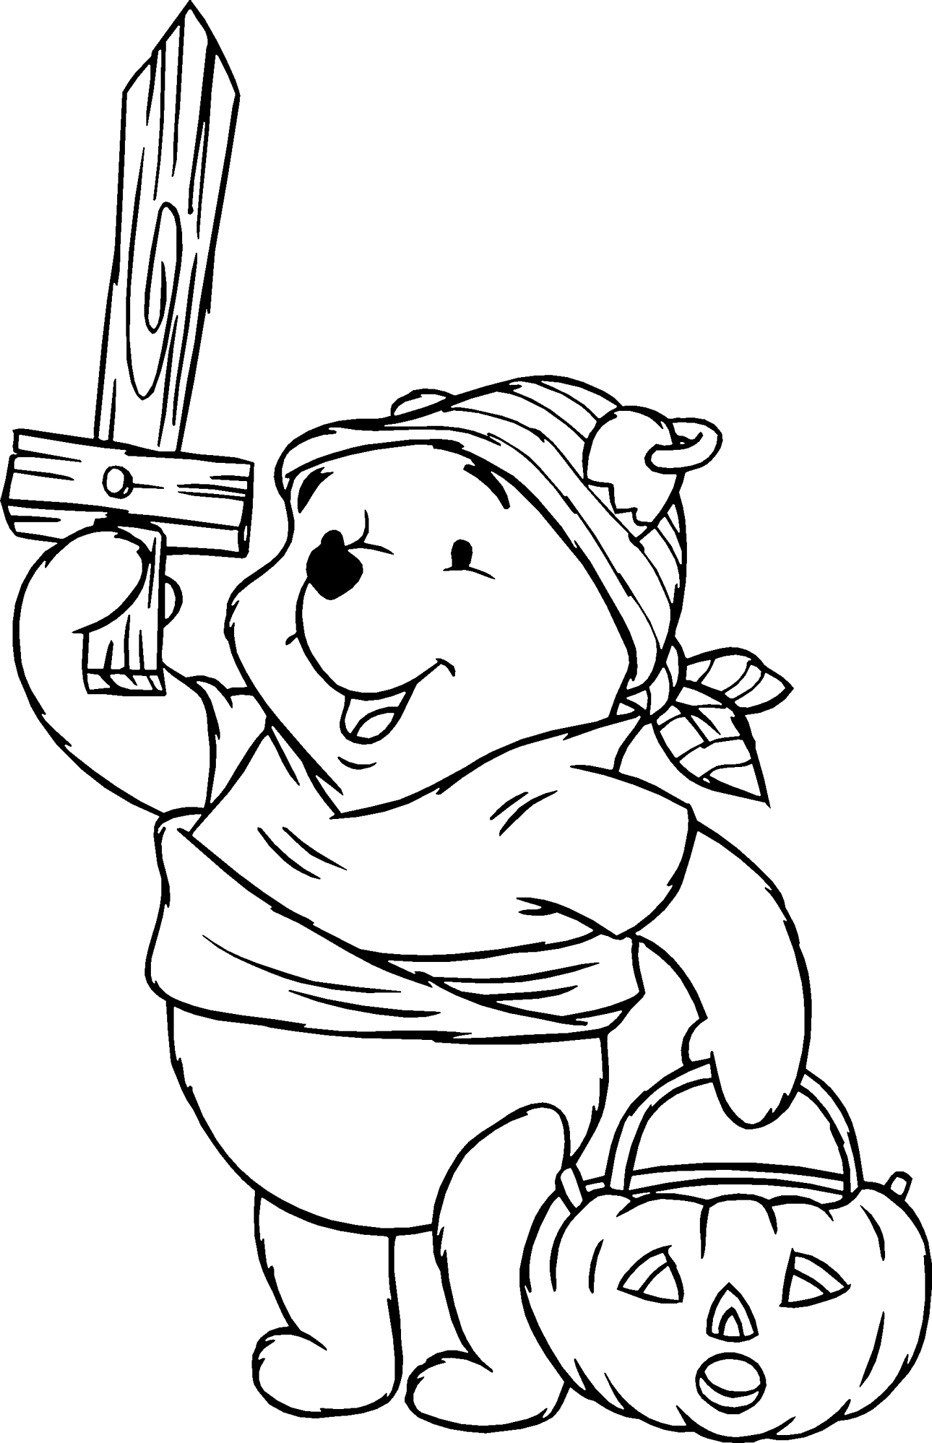 Free Coloring Pages For Toddlers
 24 Free Printable Halloween Coloring Pages for Kids